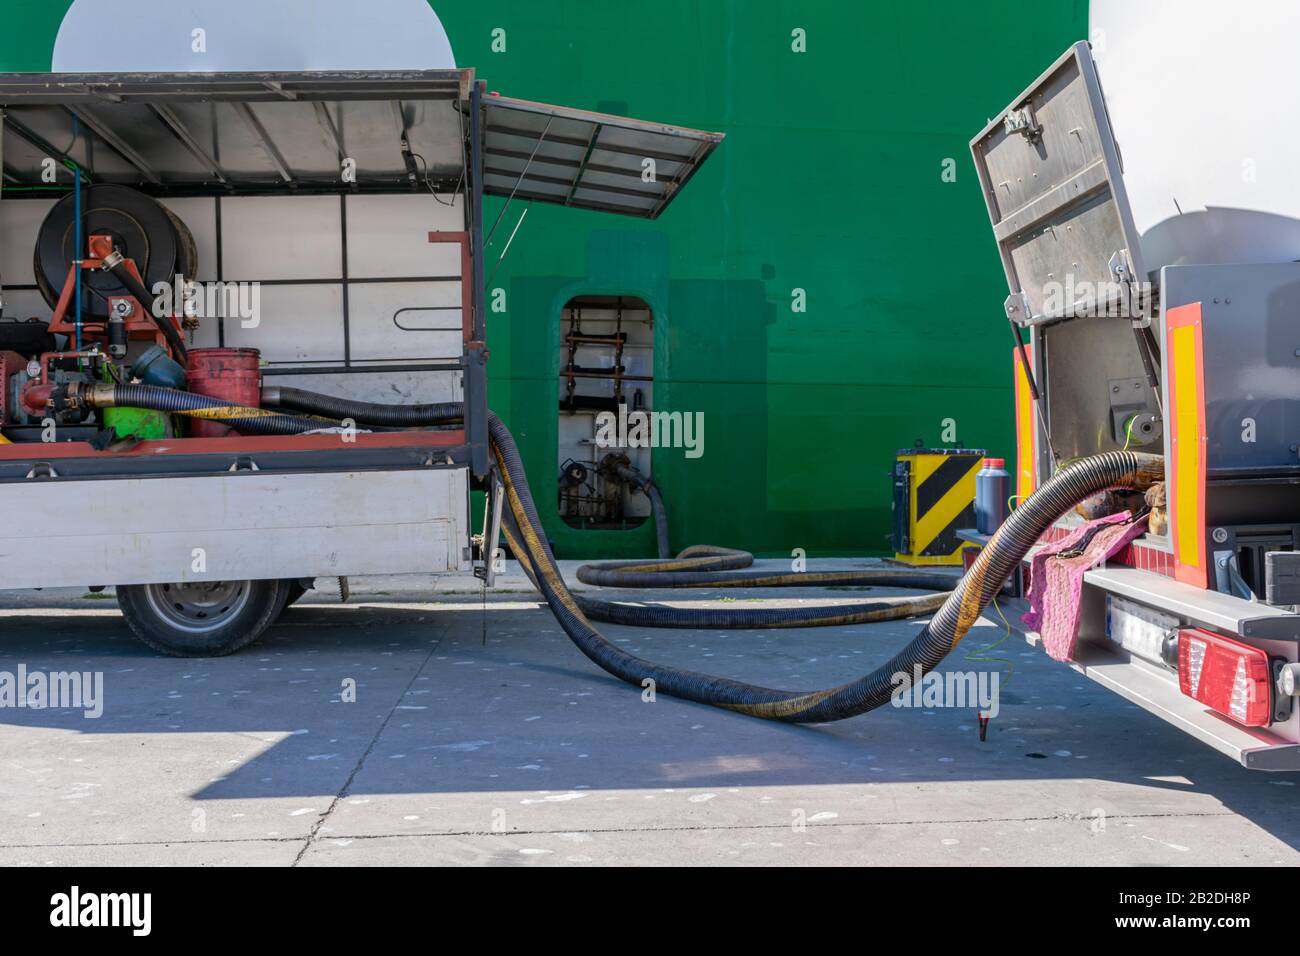 Hoses connected to a ship in the port for fuel supply Stock Photo